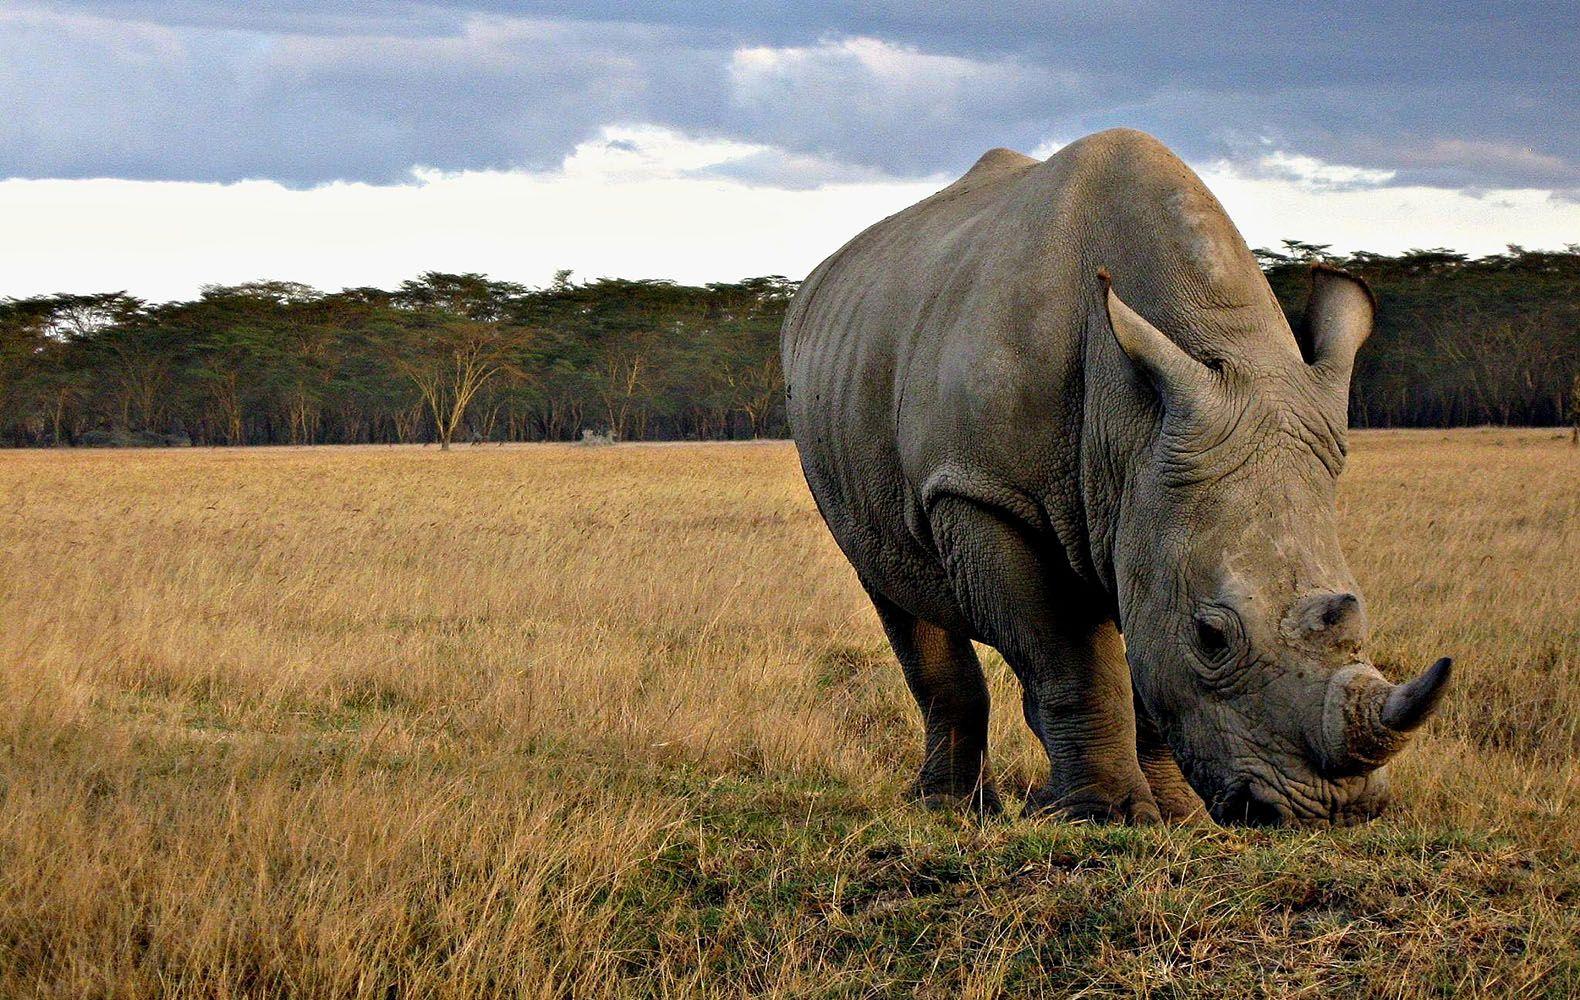 Rhinoceros Animals Photos Free Stock HQ Wallpapers Download